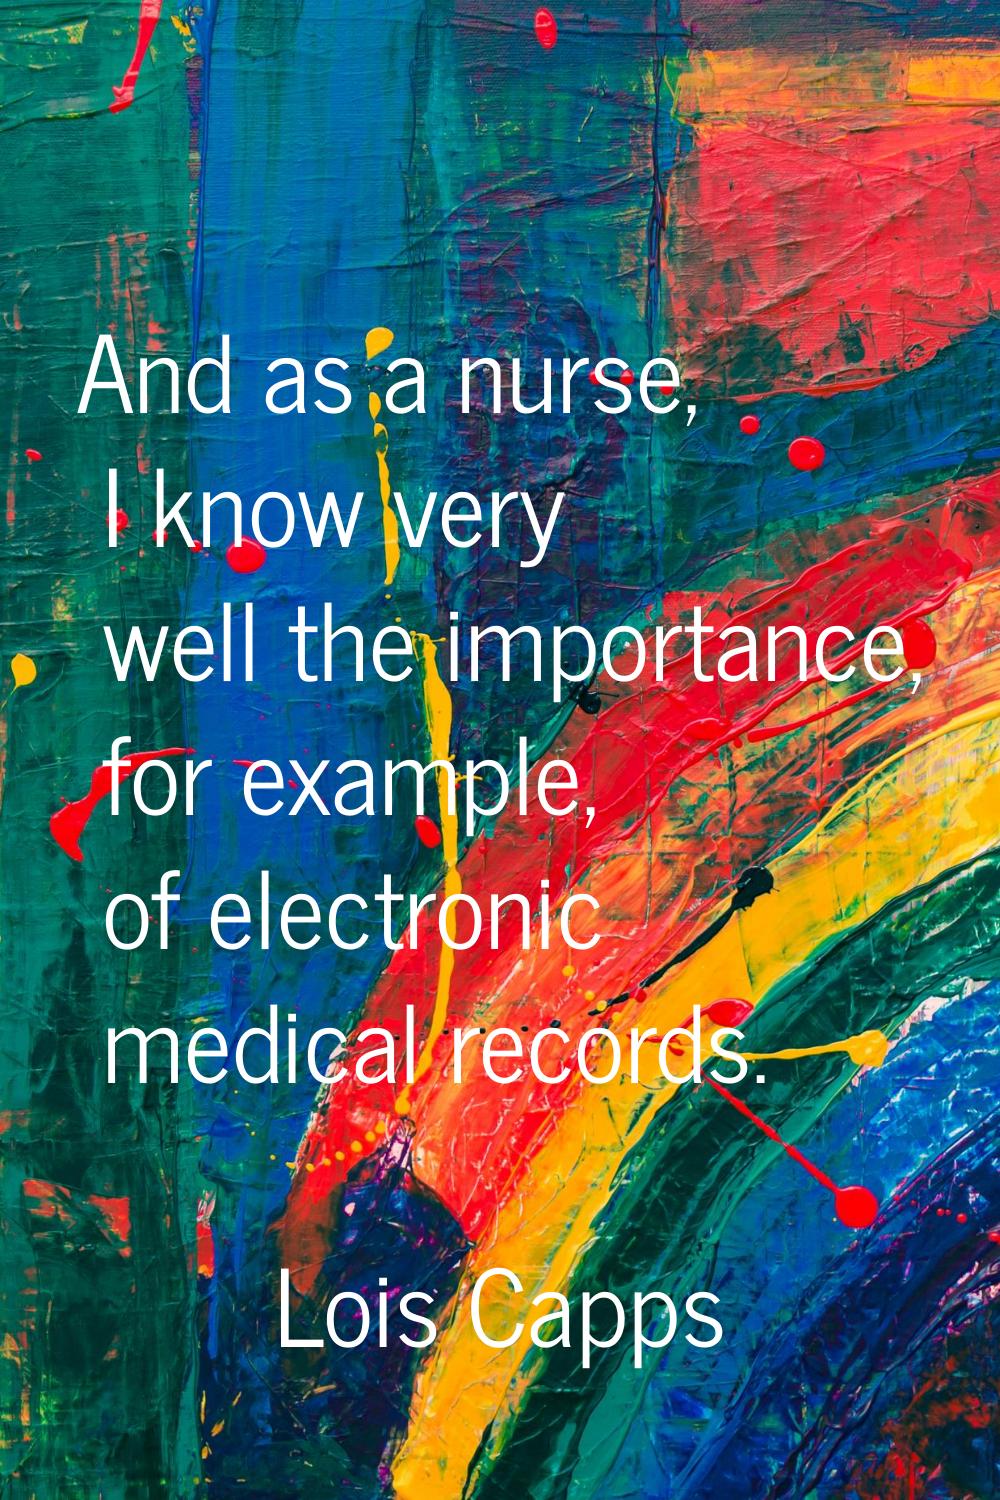 And as a nurse, I know very well the importance, for example, of electronic medical records.